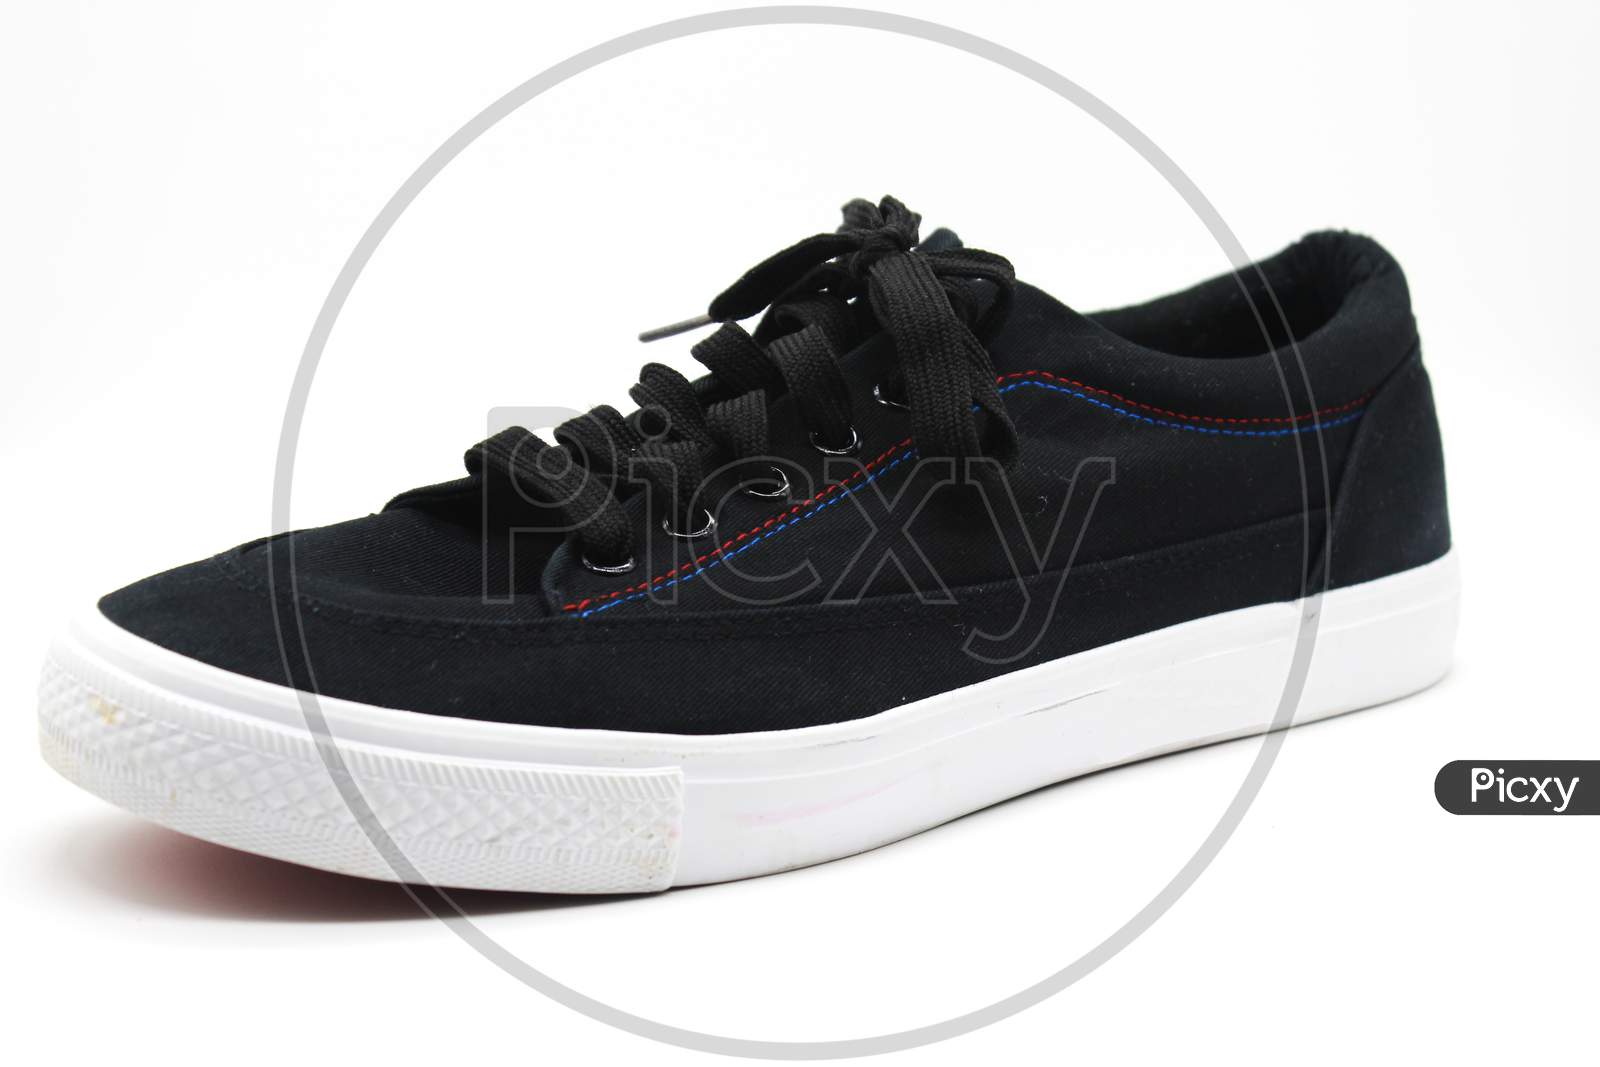 Black Shose For Men On White Background With Selective Focus